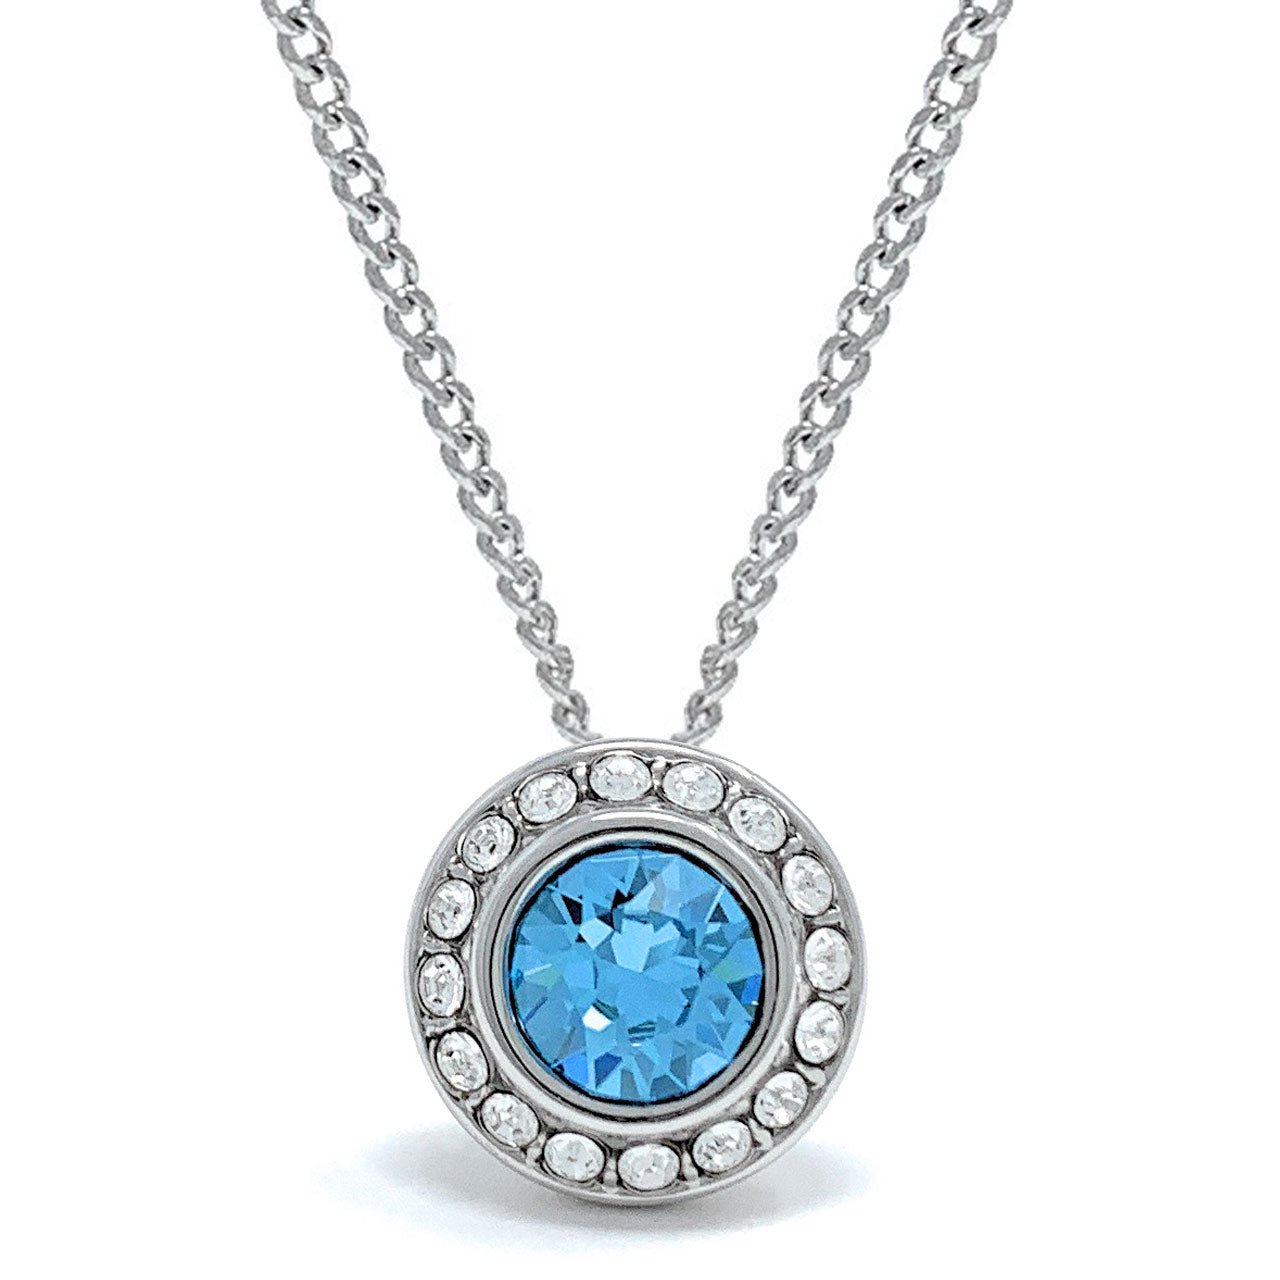 Halo Pave Pendant Necklace with Blue Aquamarine Round Crystals from Swarovski Silver Toned Rhodium Plated - Ed Heart